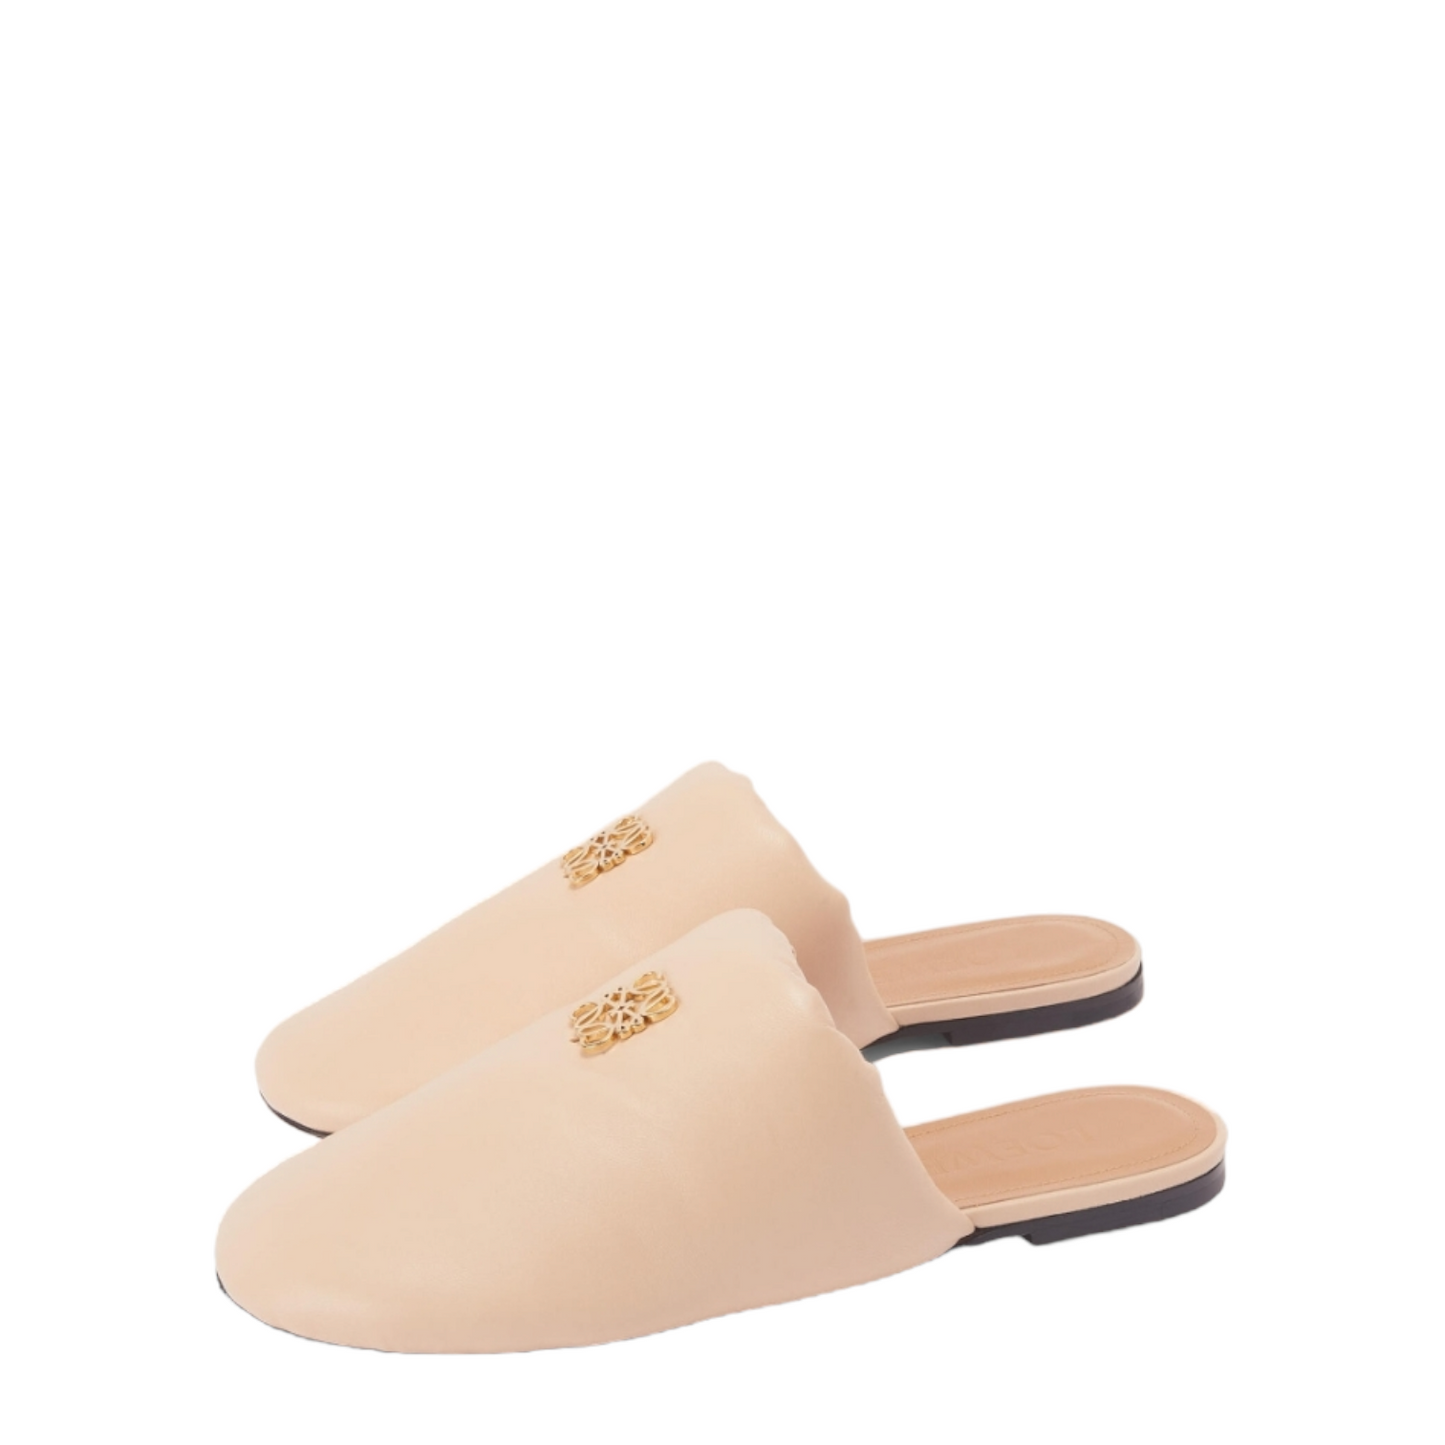 Loewe Leather padded anagram mules, size 6(slim fit, more like 5)